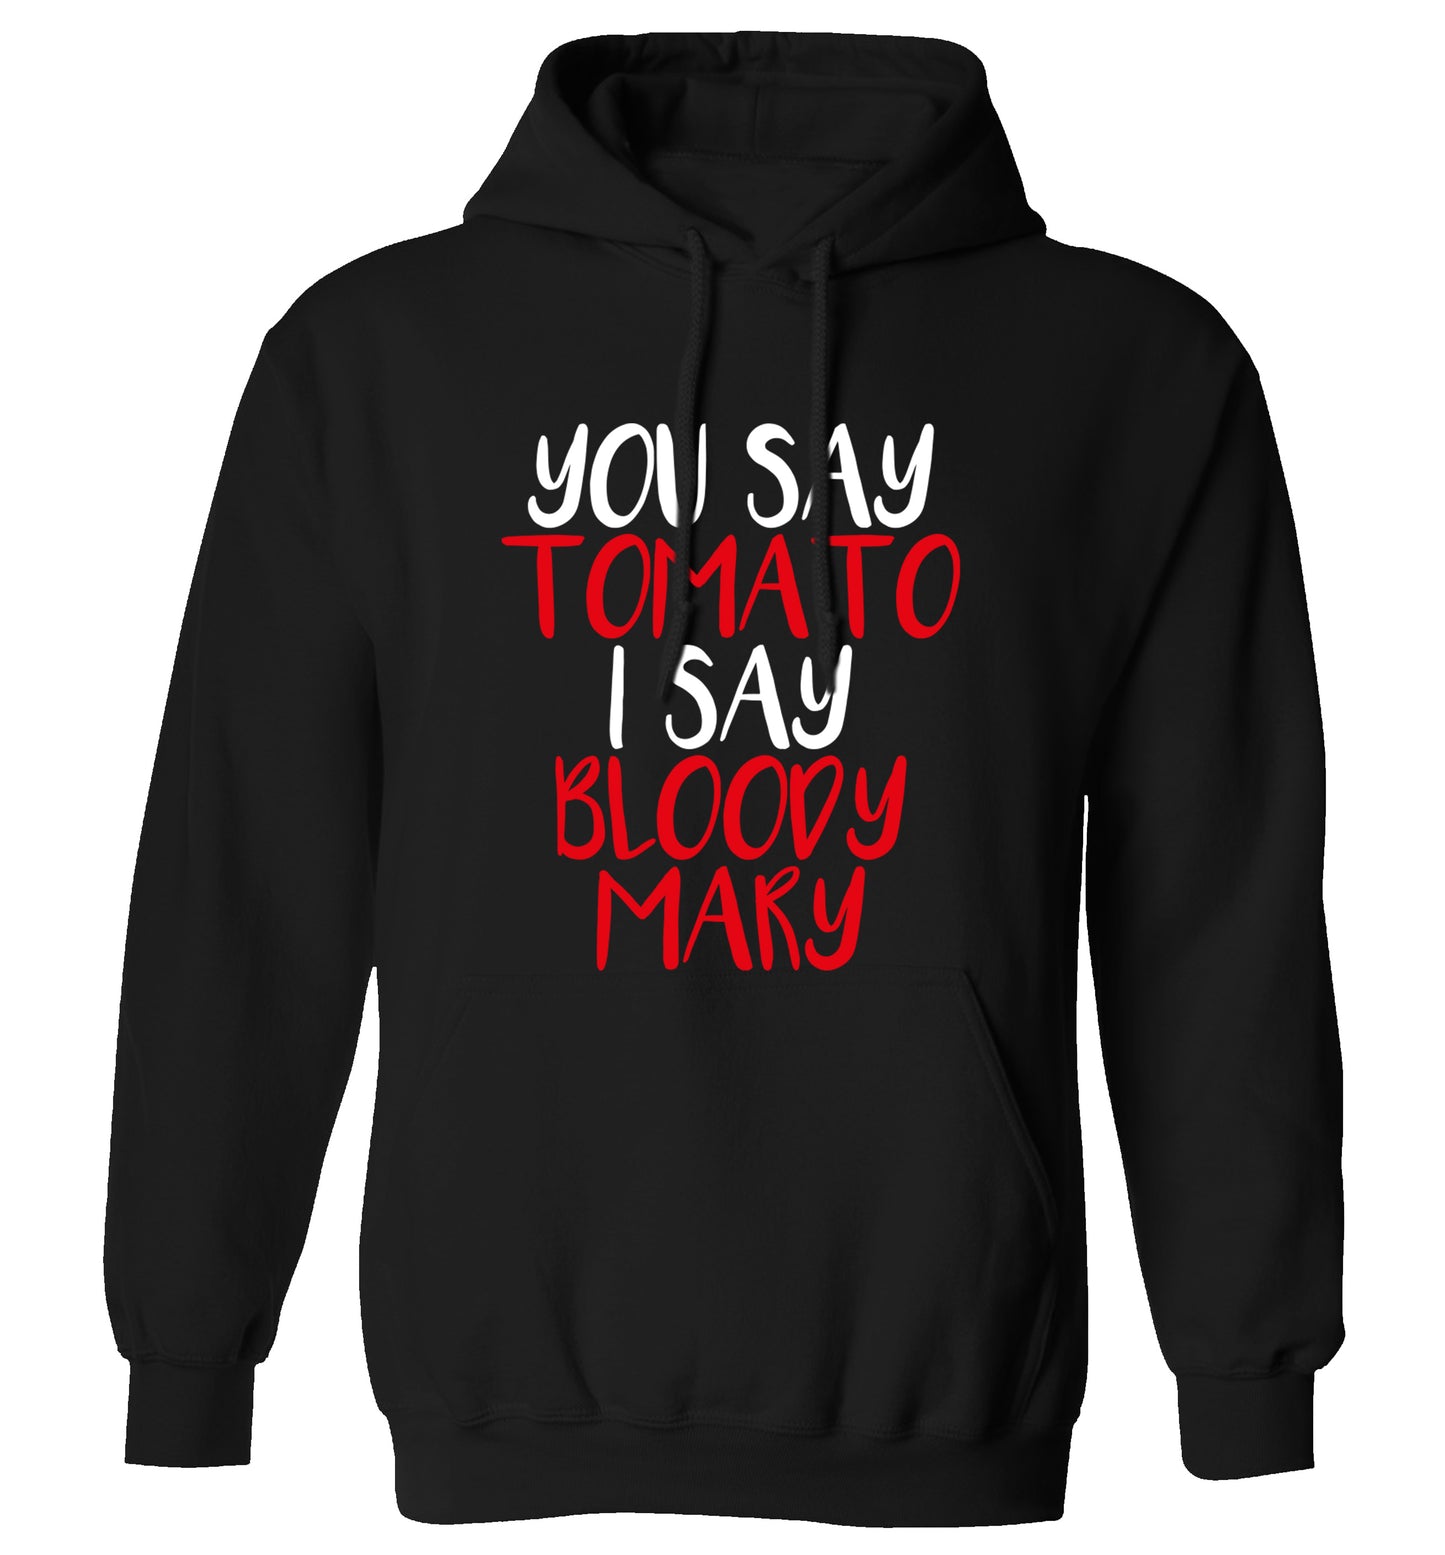 You say tomato I say bloody mary adults unisex black hoodie 2XL